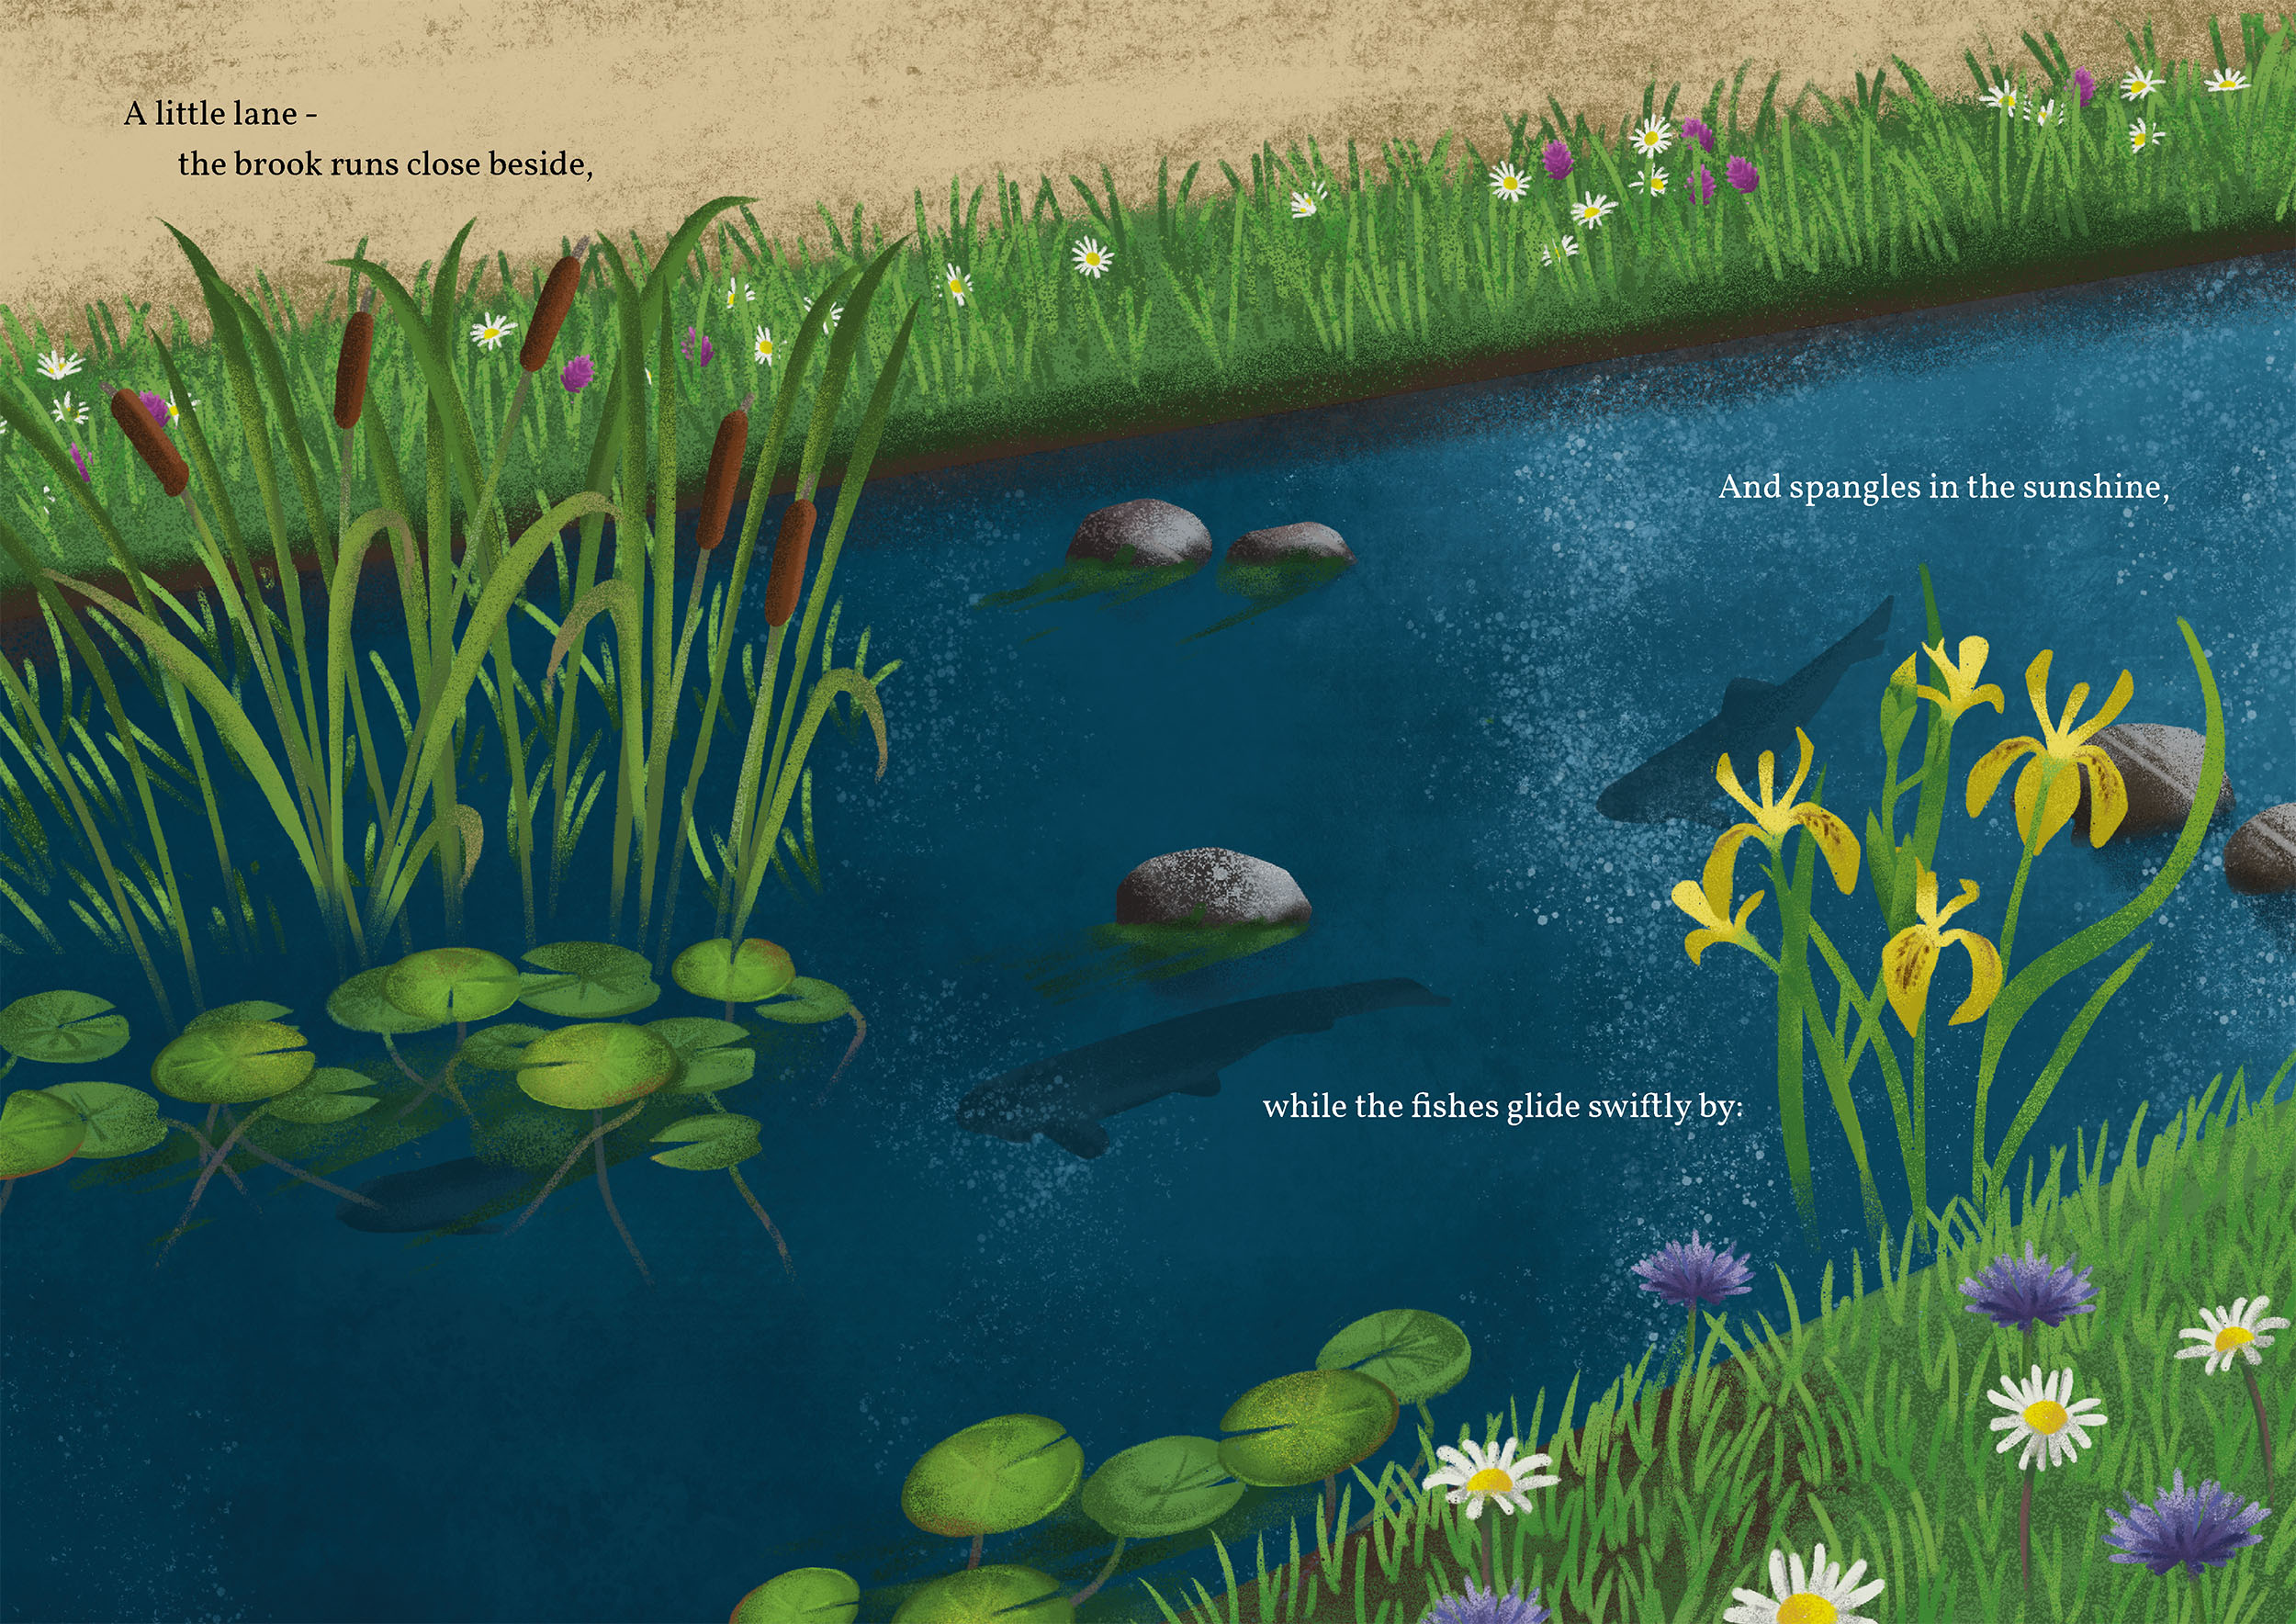 Illustrated spread of the first stanza of John Clare's 'On a Lane in Spring'. Showing a river and some fish.